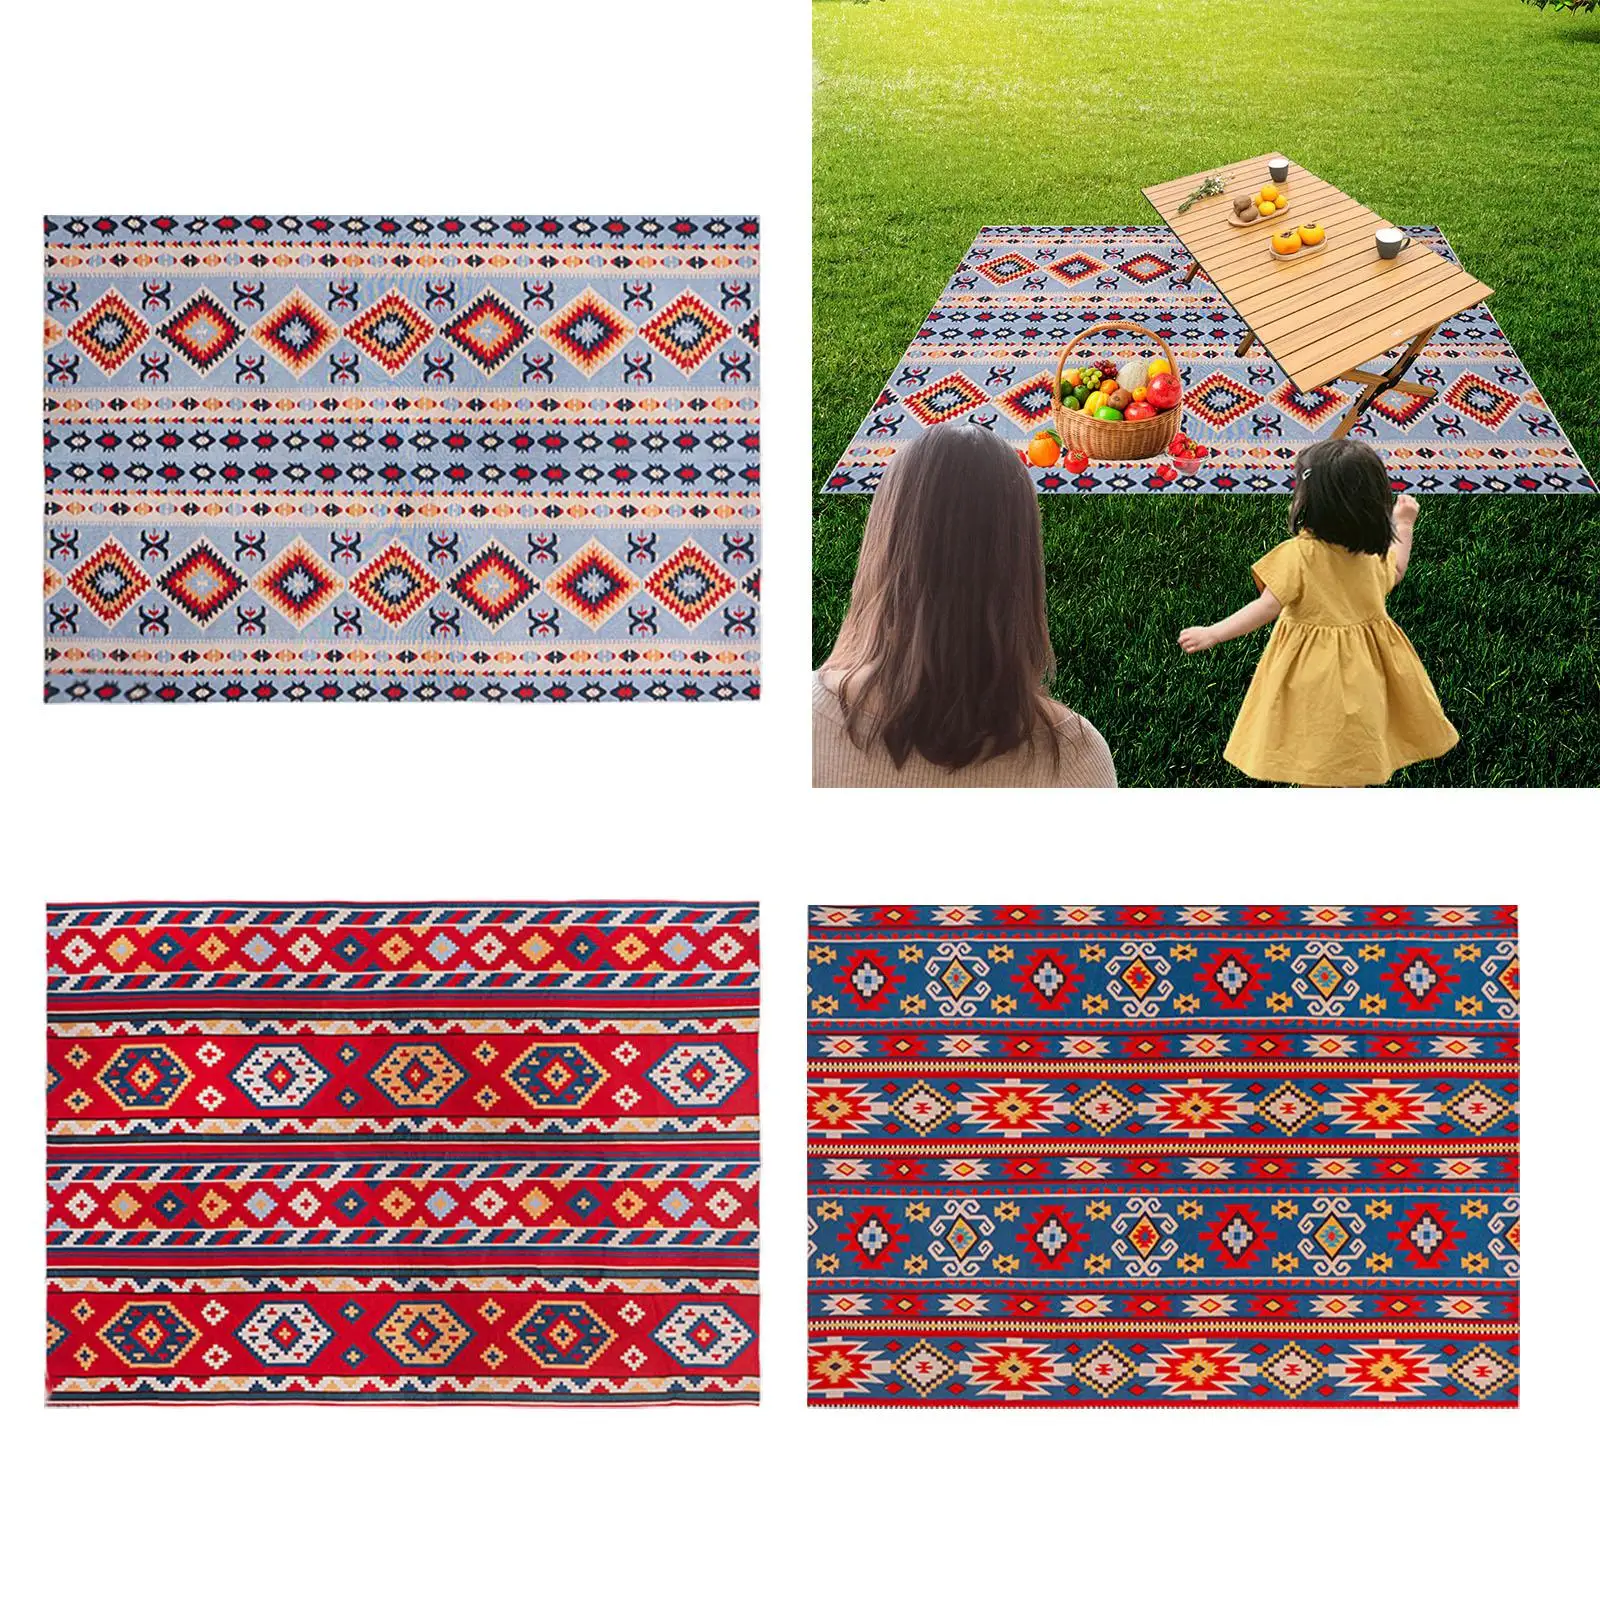 Large Picnic Outdoor Blanket Waterproof Portable Protective Foldable Blanket Mat Picnic Mat for Park Hiking Garden Lawn